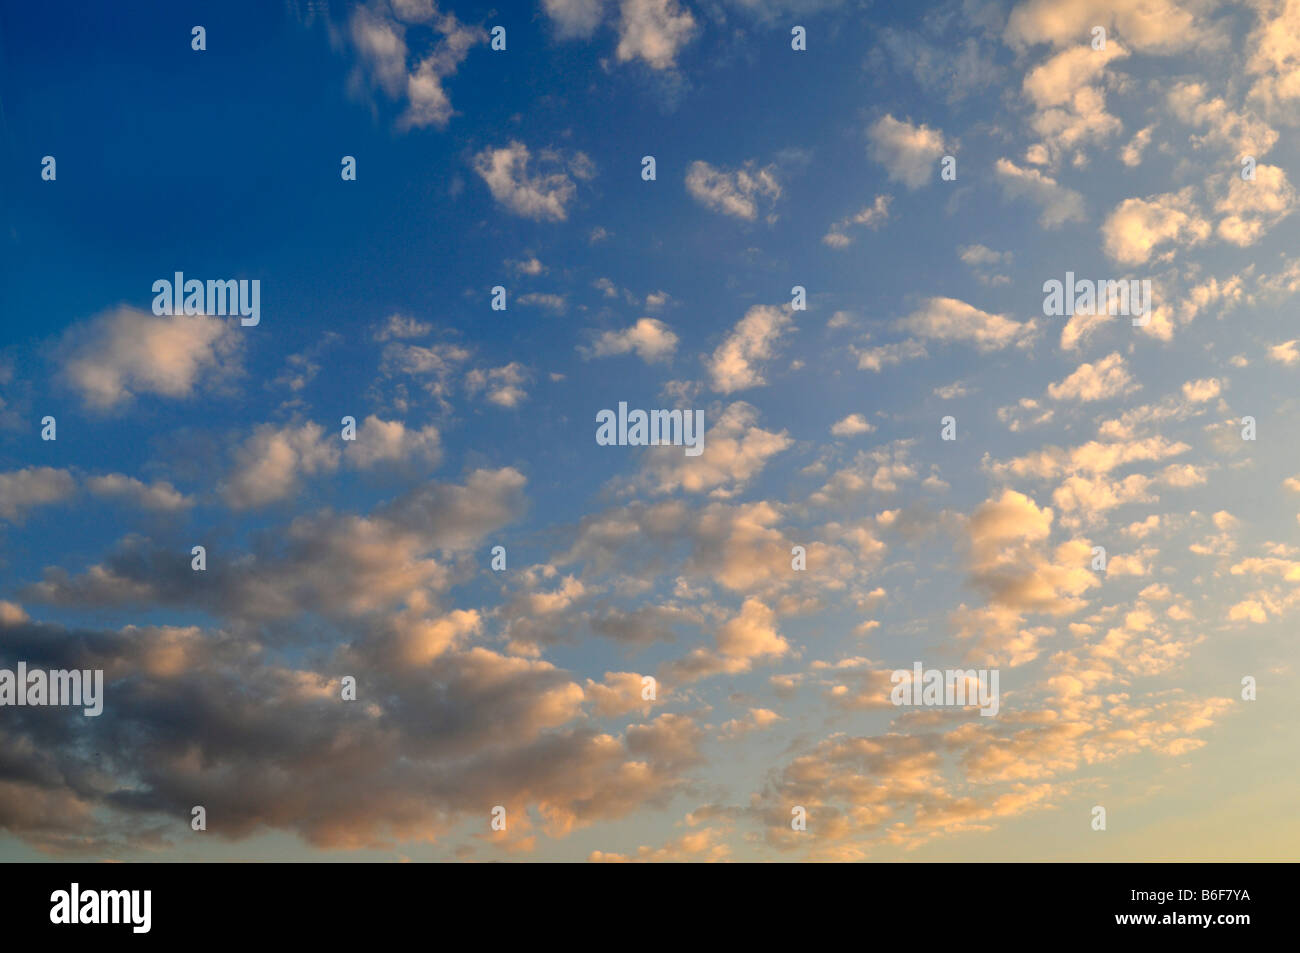 Fair-weather clouds in a blue sky at sunset Stock Photo